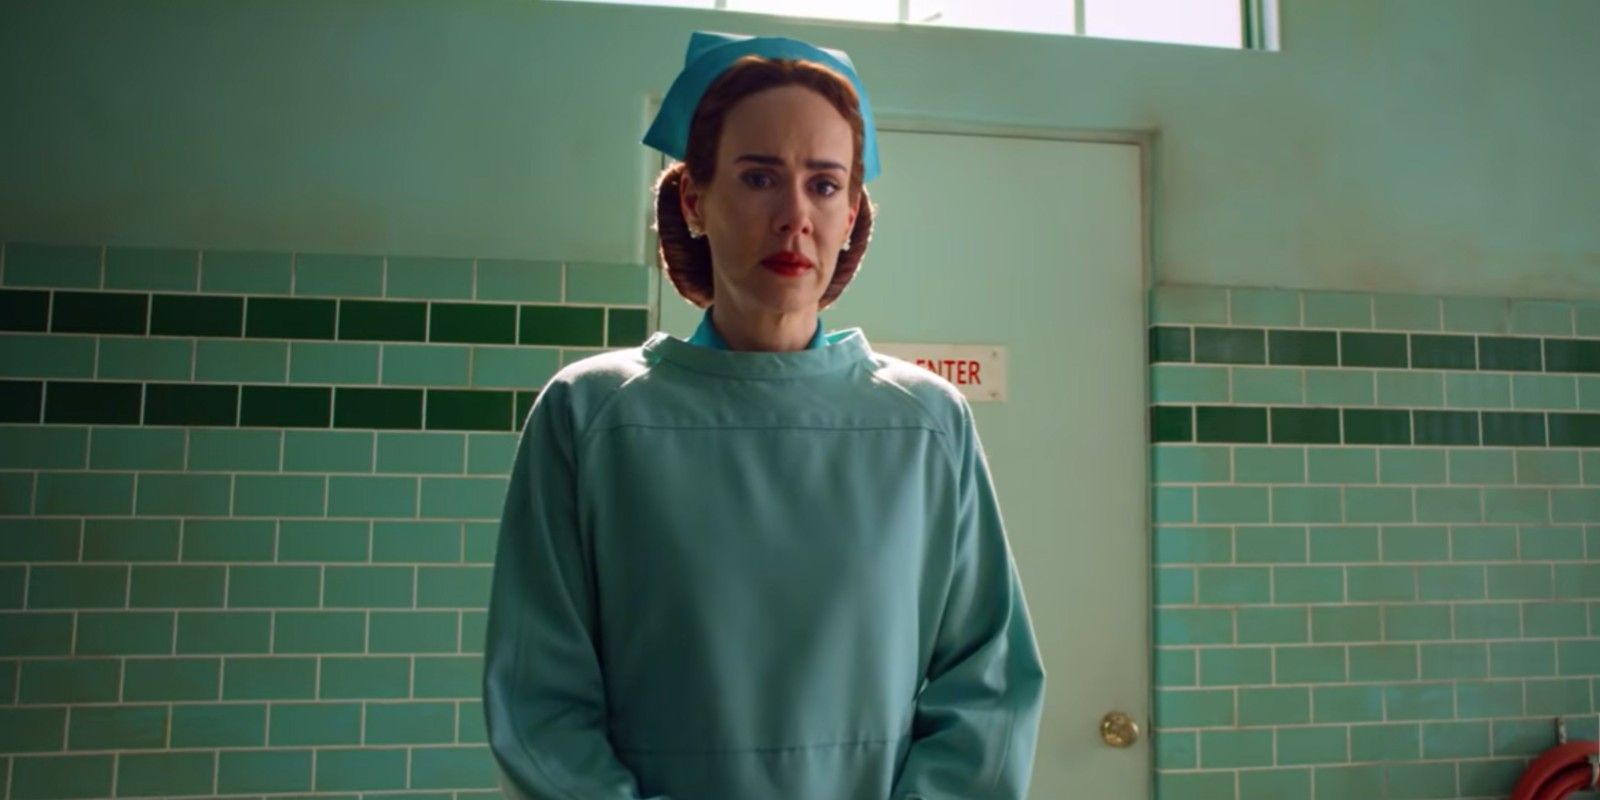 Sarah Paulson as Ratched in operating scrubs in Ratched.